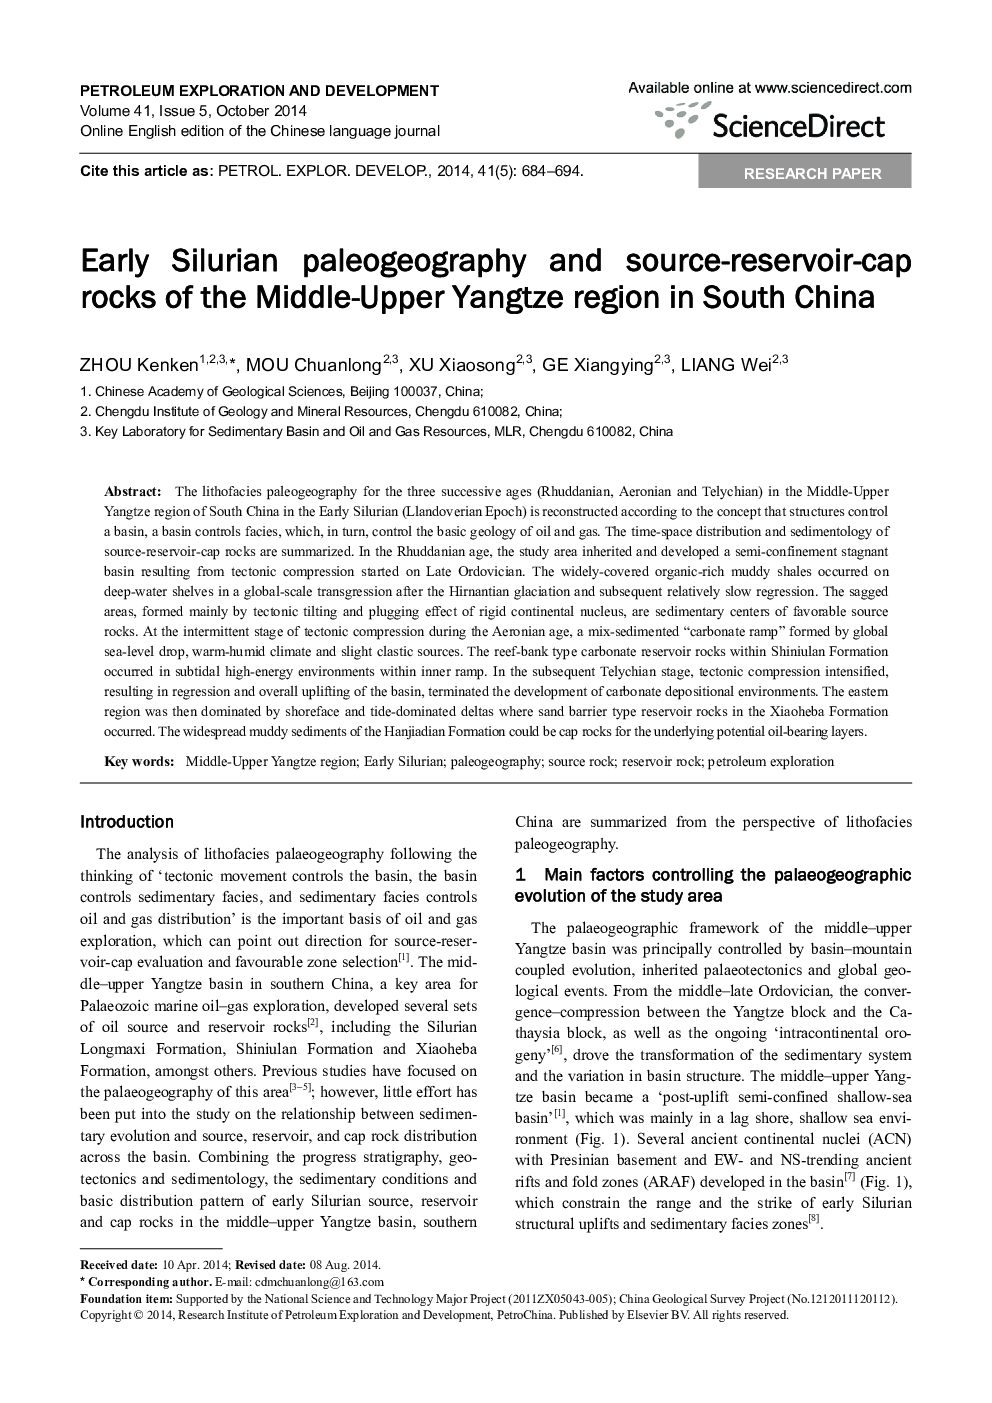 Early Silurian paleogeography and source-reservoir-cap rocks of the Middle-Upper Yangtze region in South China 